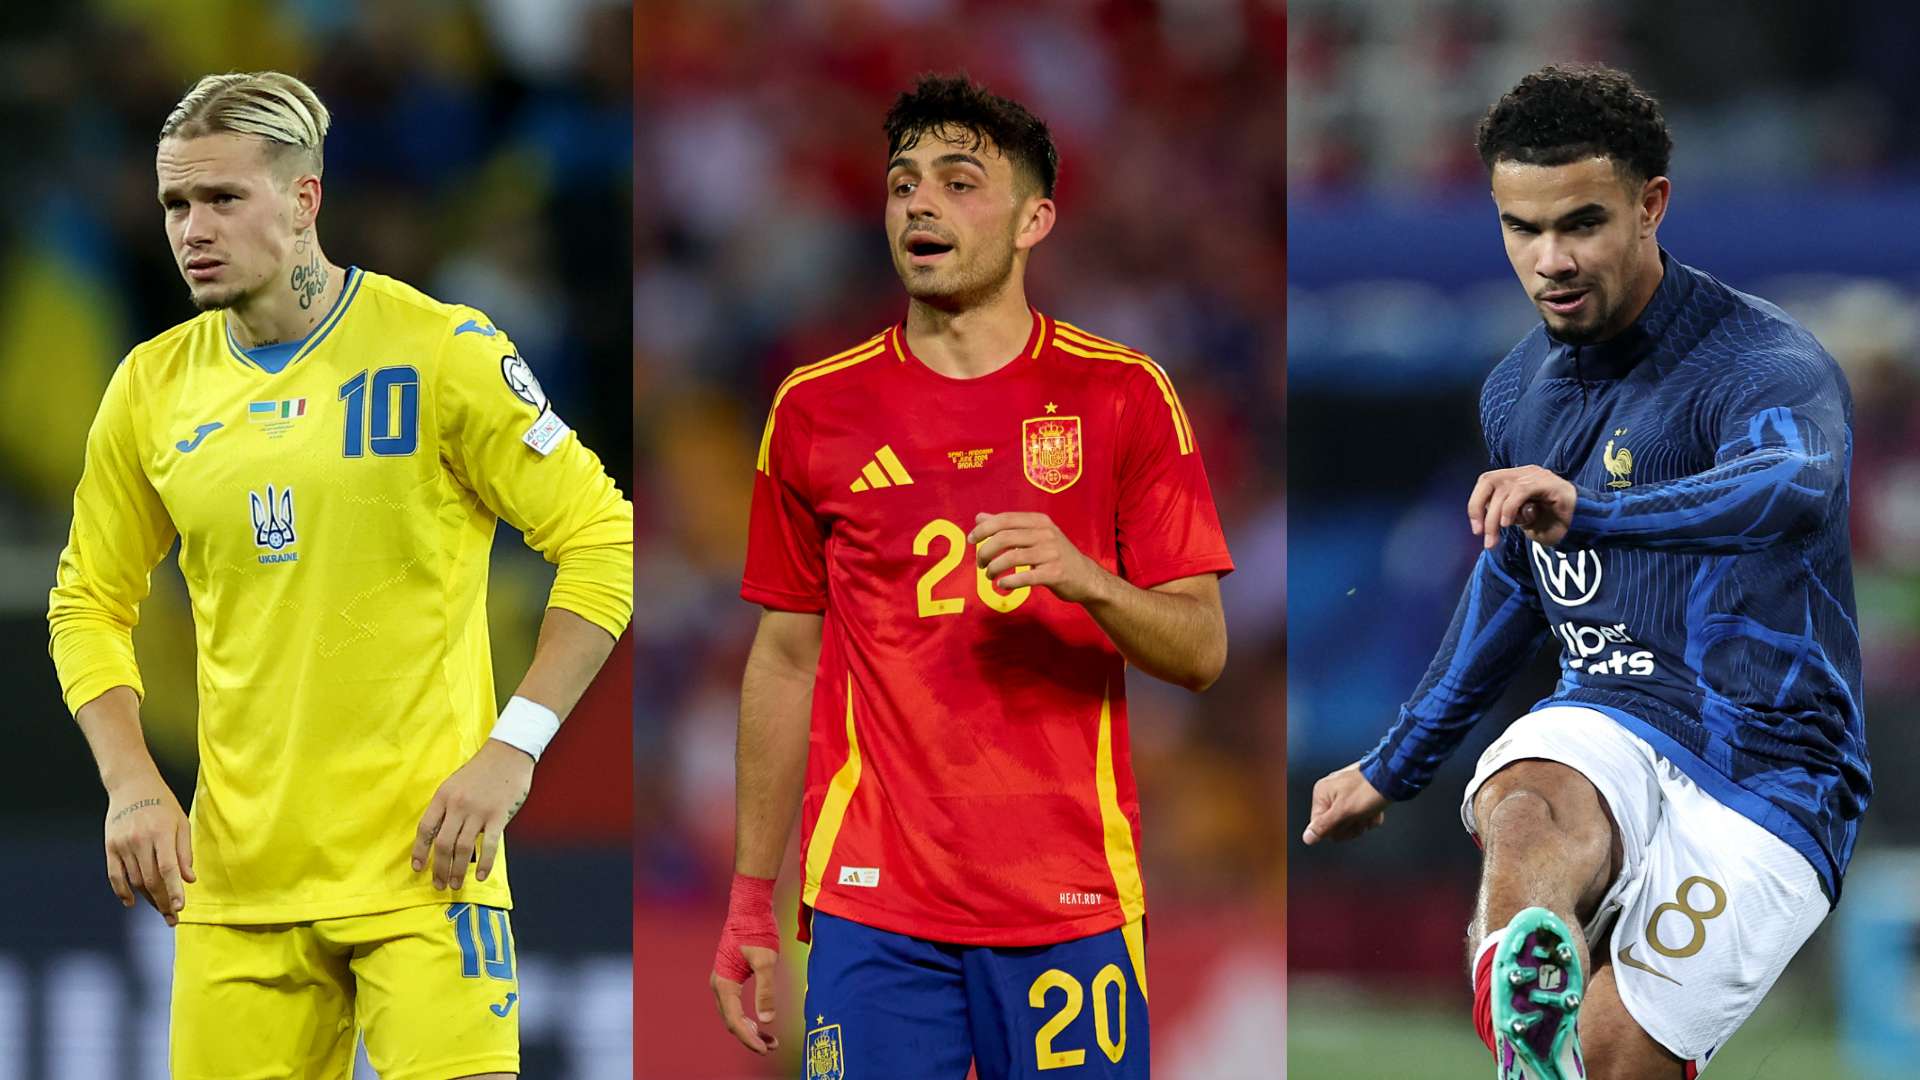 2024 Olympics soccer squads - Spain, Ukraine and France